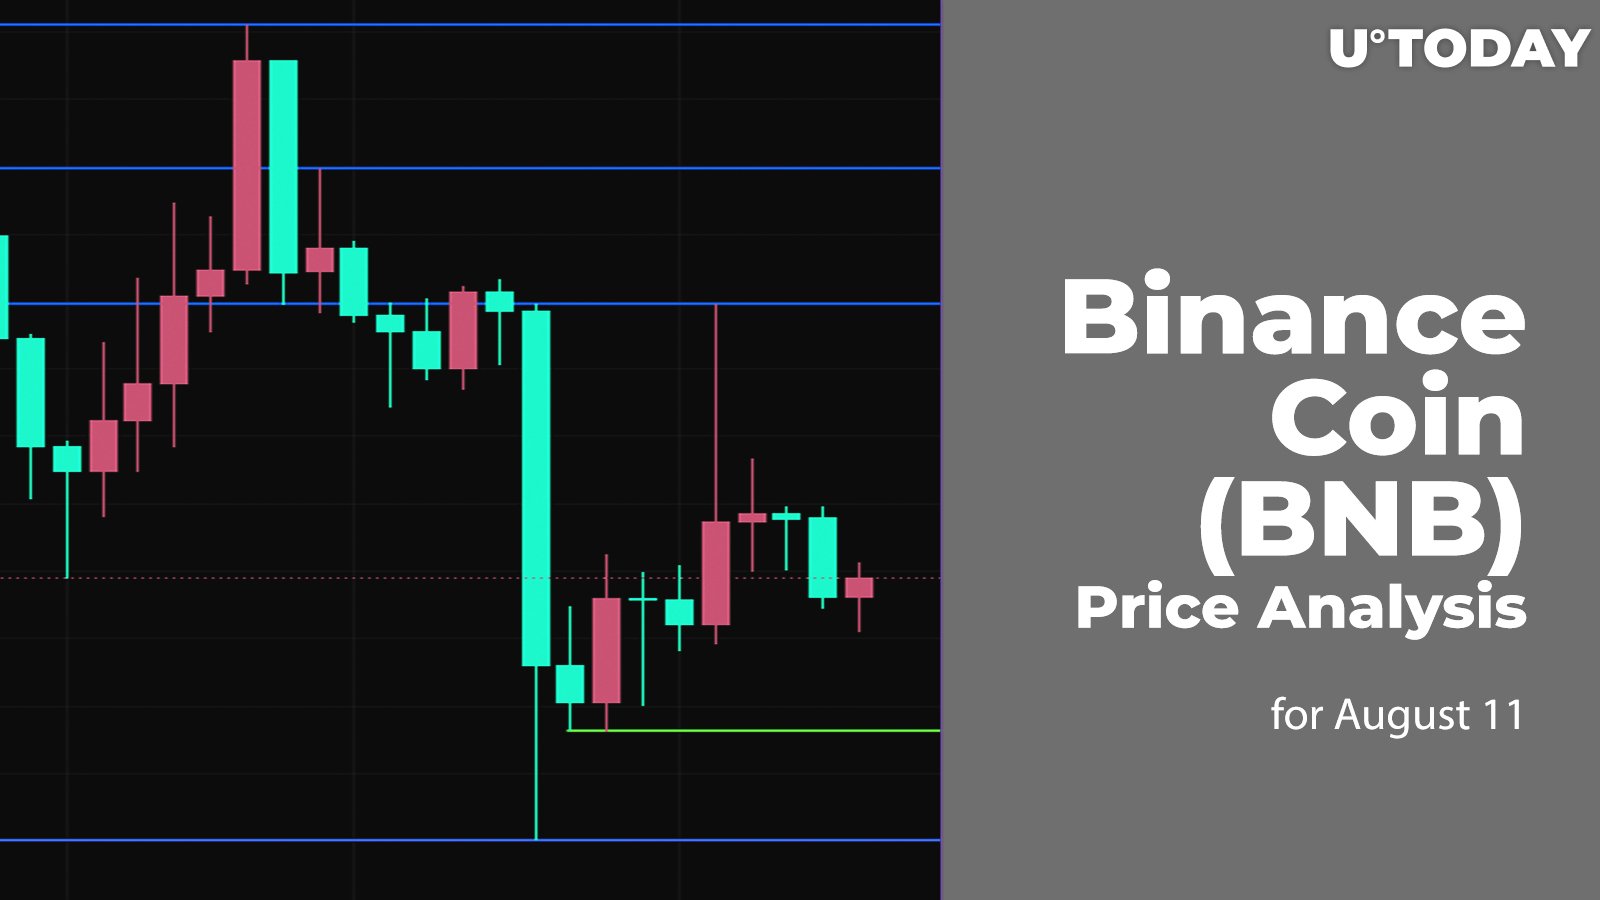 Binance Coin (BNB) Price Analysis for August 11